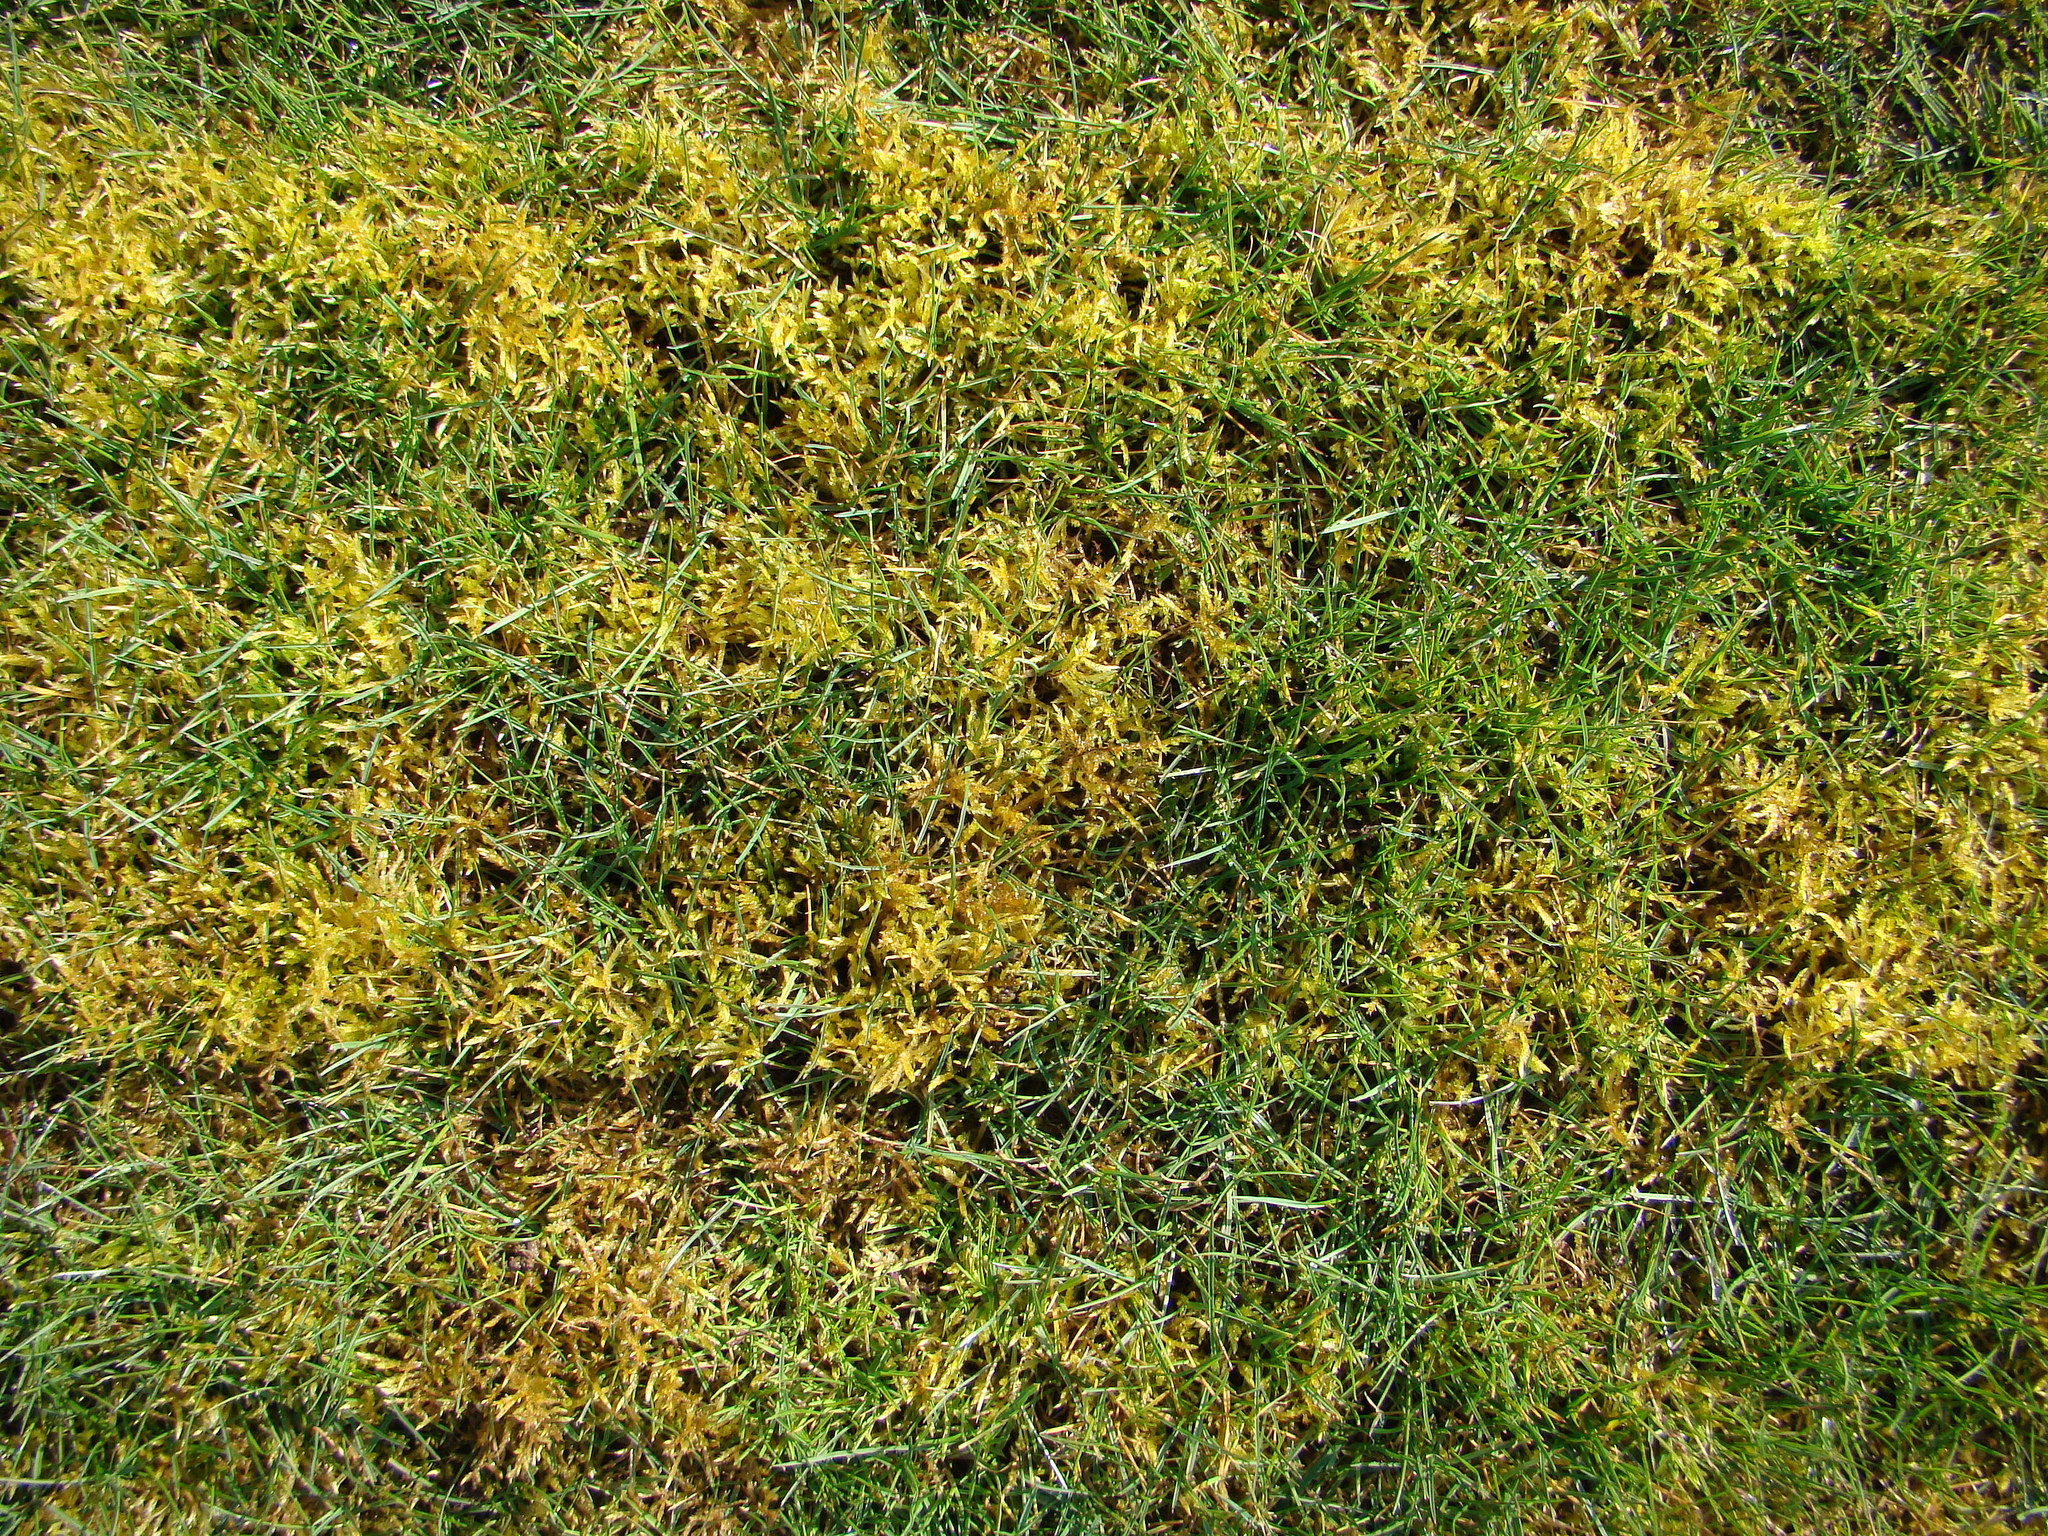 Control moss in the lawn by keeping grass healthy